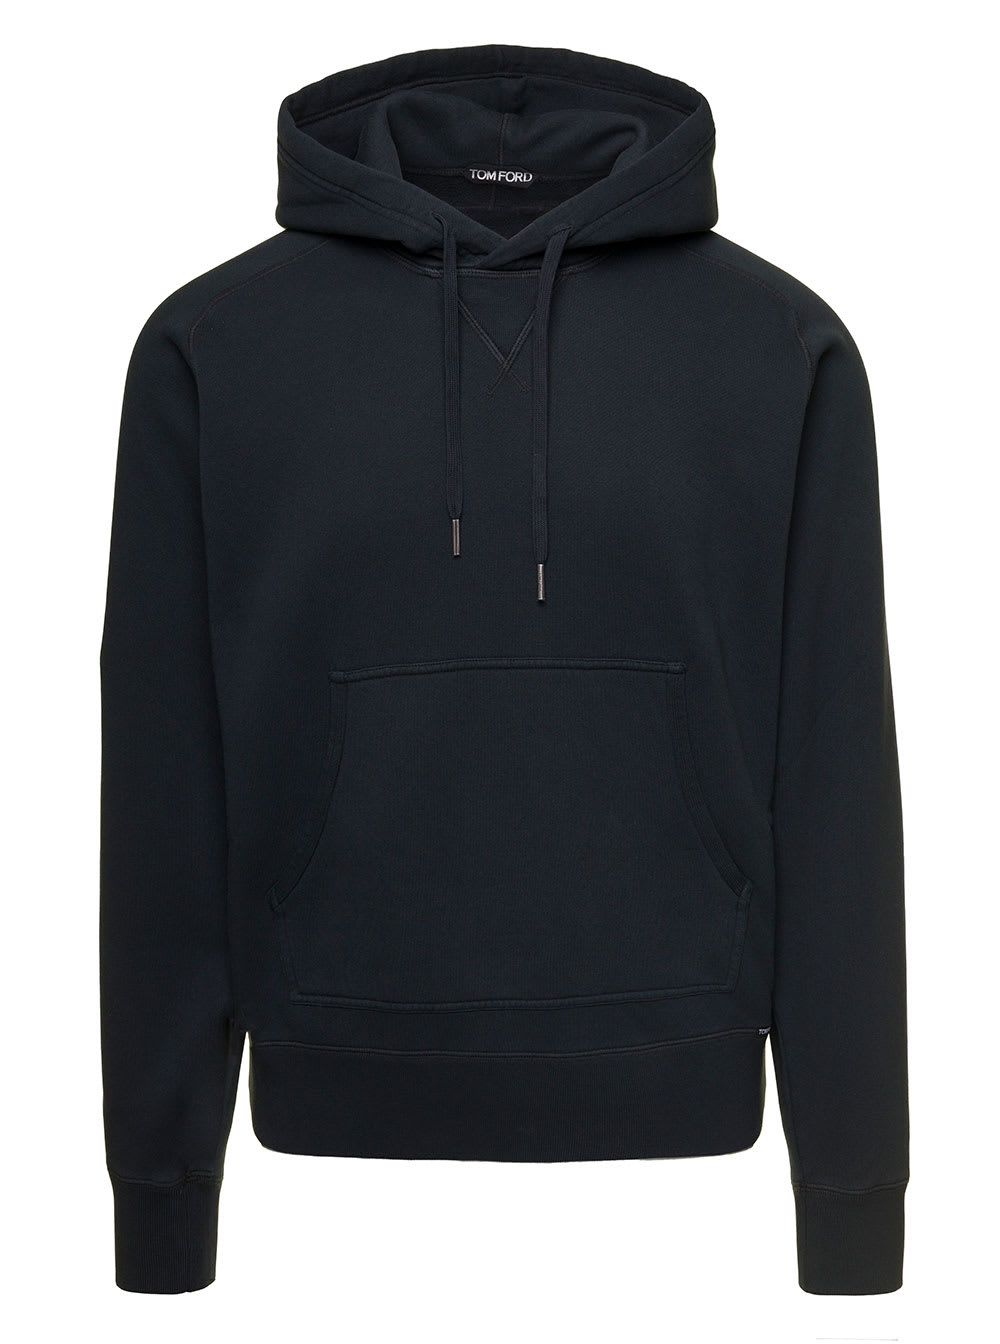 TOM FORD BLACK HOODIE WITH KANGAROO POCKET IN COTTON JERSEY MAN TOM FORD